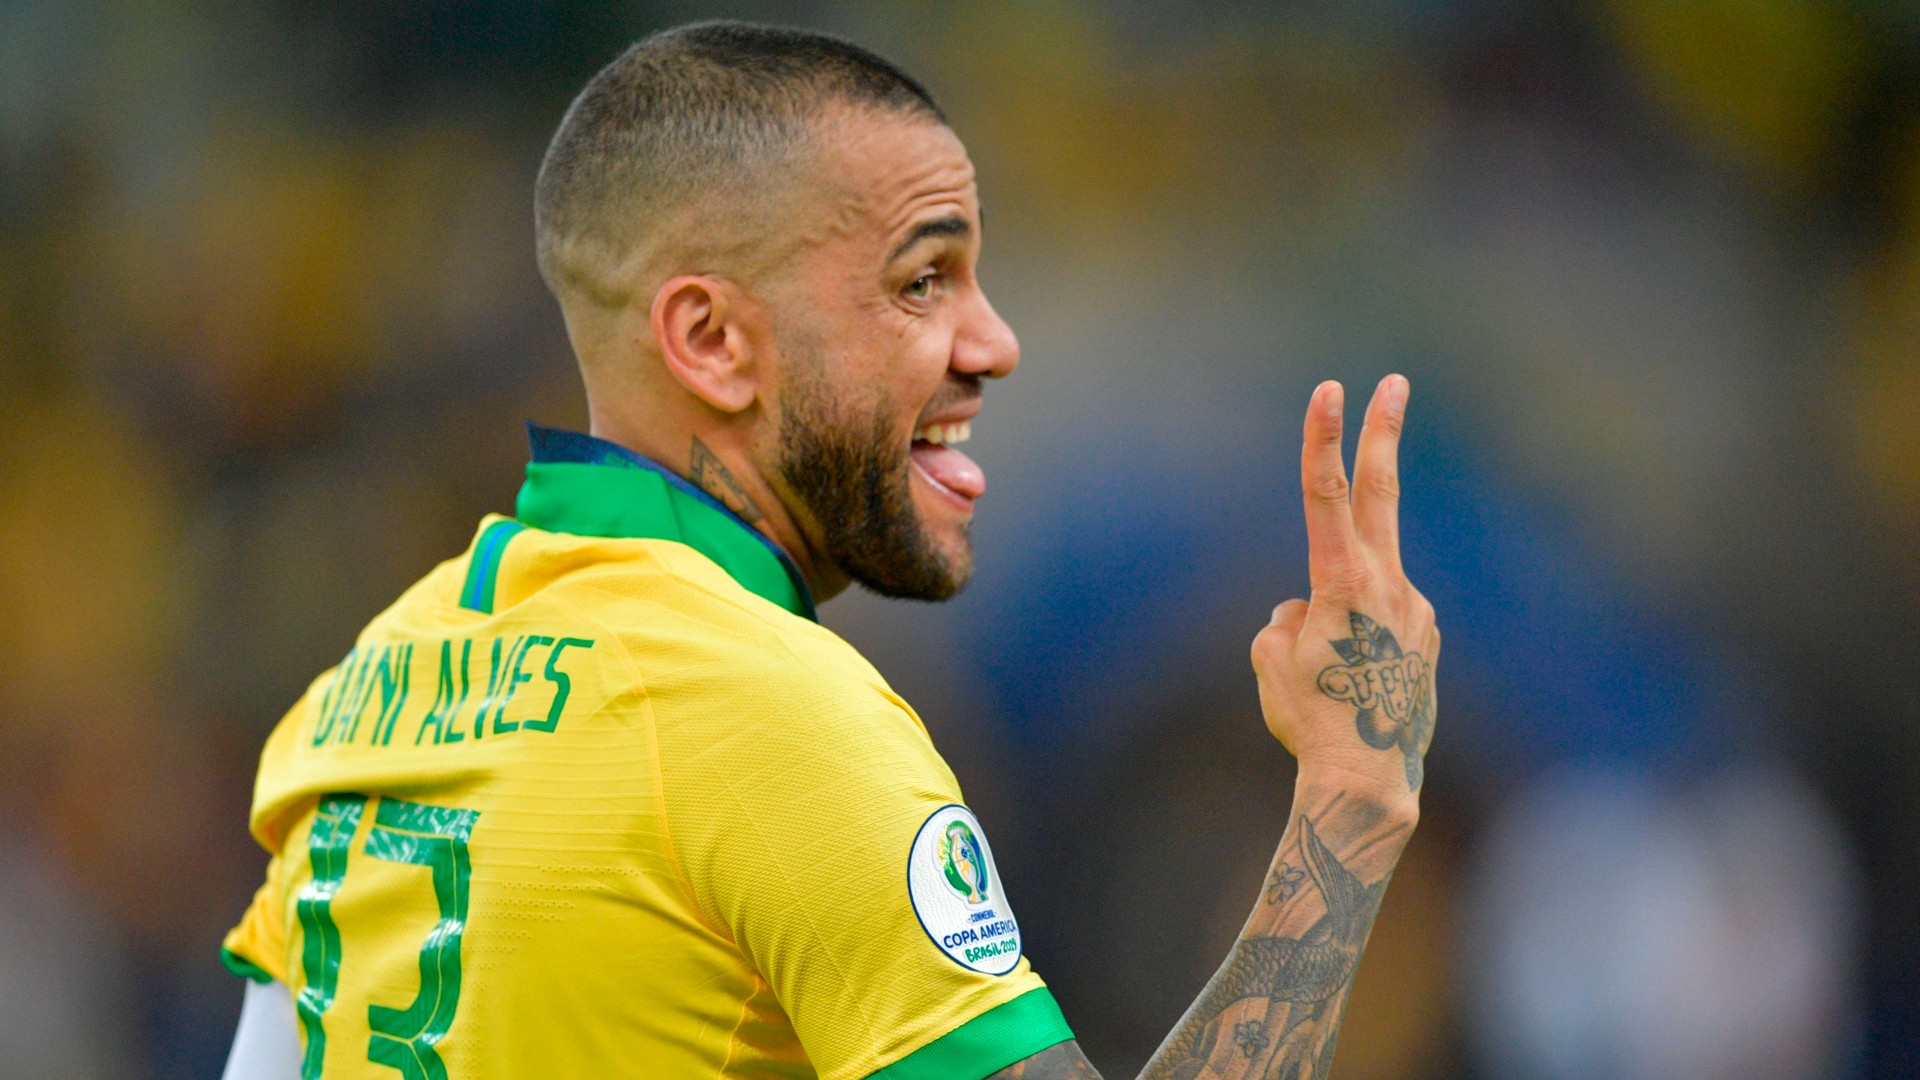 He is a leader, a winner' Cup dream driving Brazil icon Dani Alves towards Olympic gold